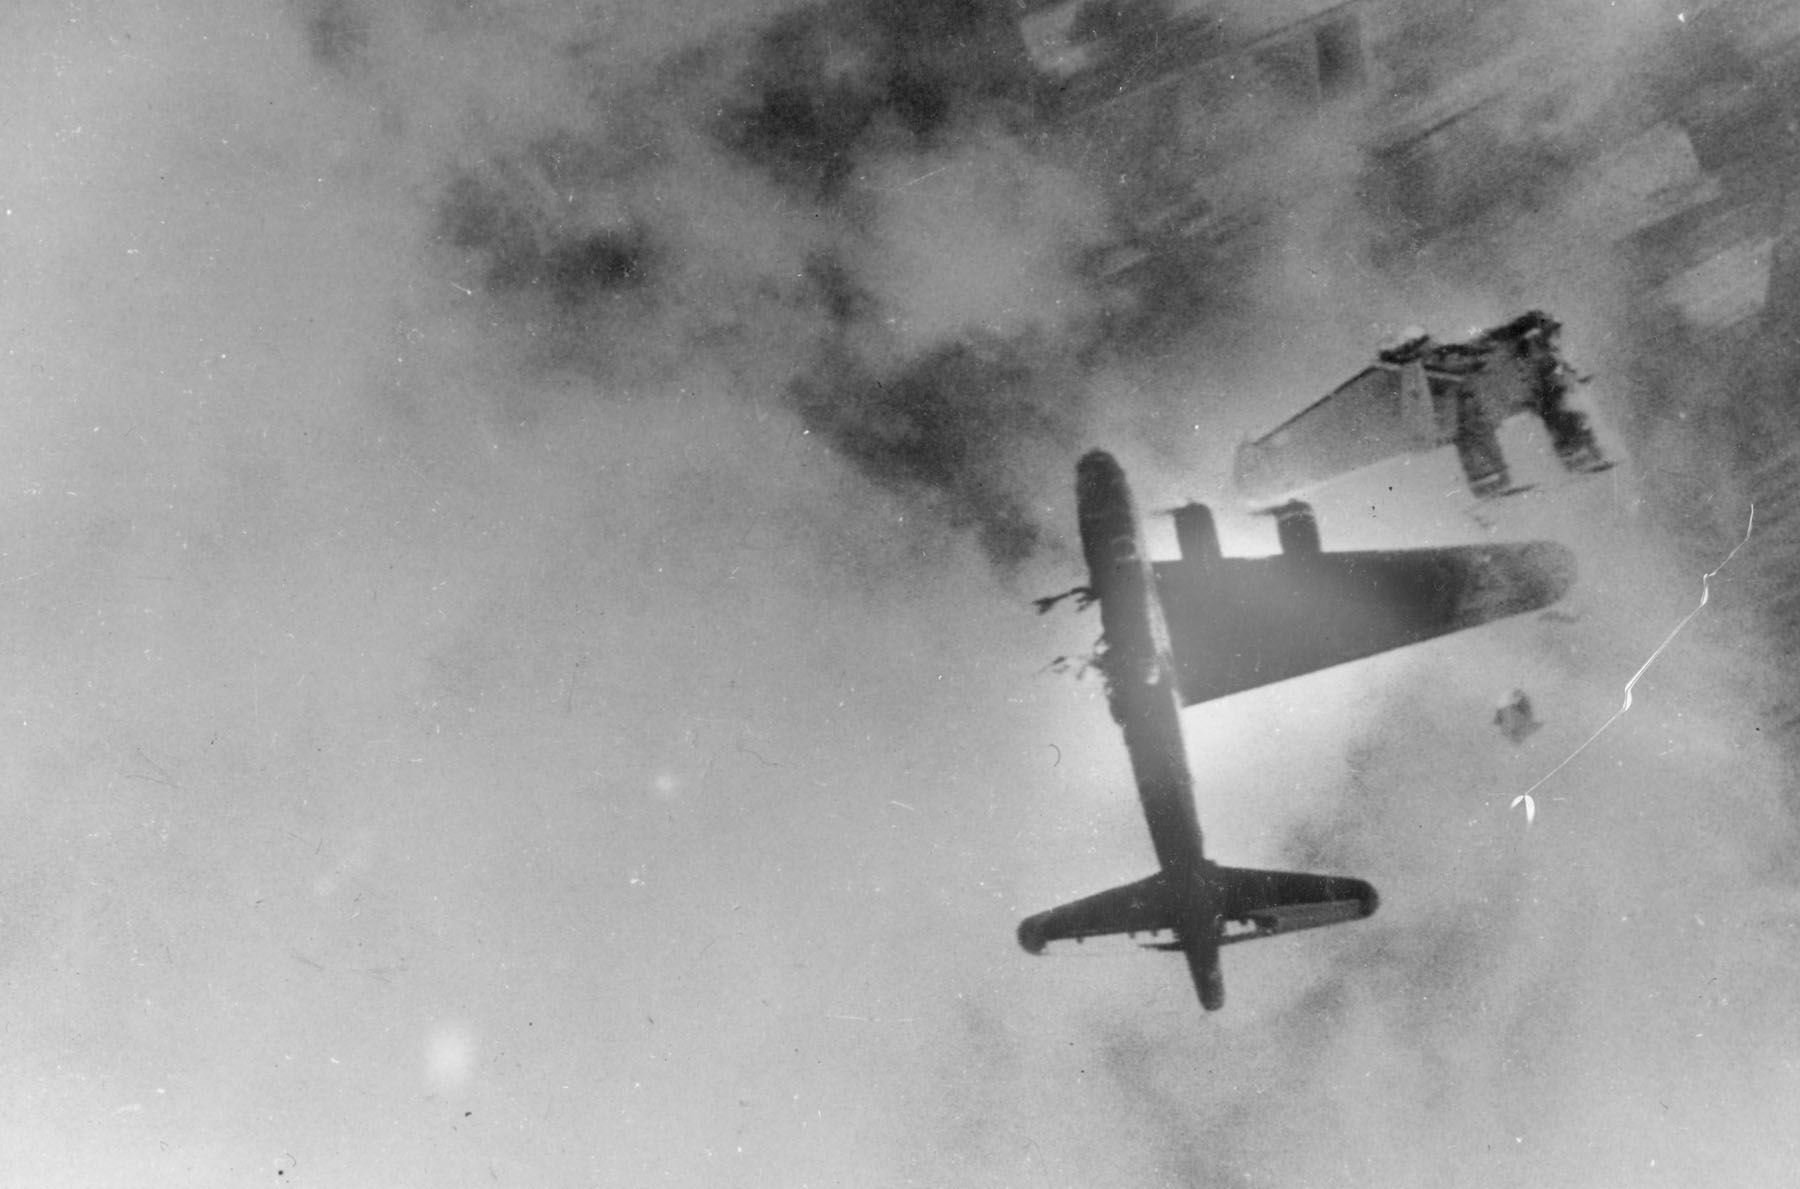 B-17G Flying Fortress 'Wee-Willie' of 322nd Bomber Squadron of USAAF 91st Bomber Group losing a wing from flak fire over Stendal, Germany, 8 Apr 1945; 8 were killed; pilot and 1 crewman survived